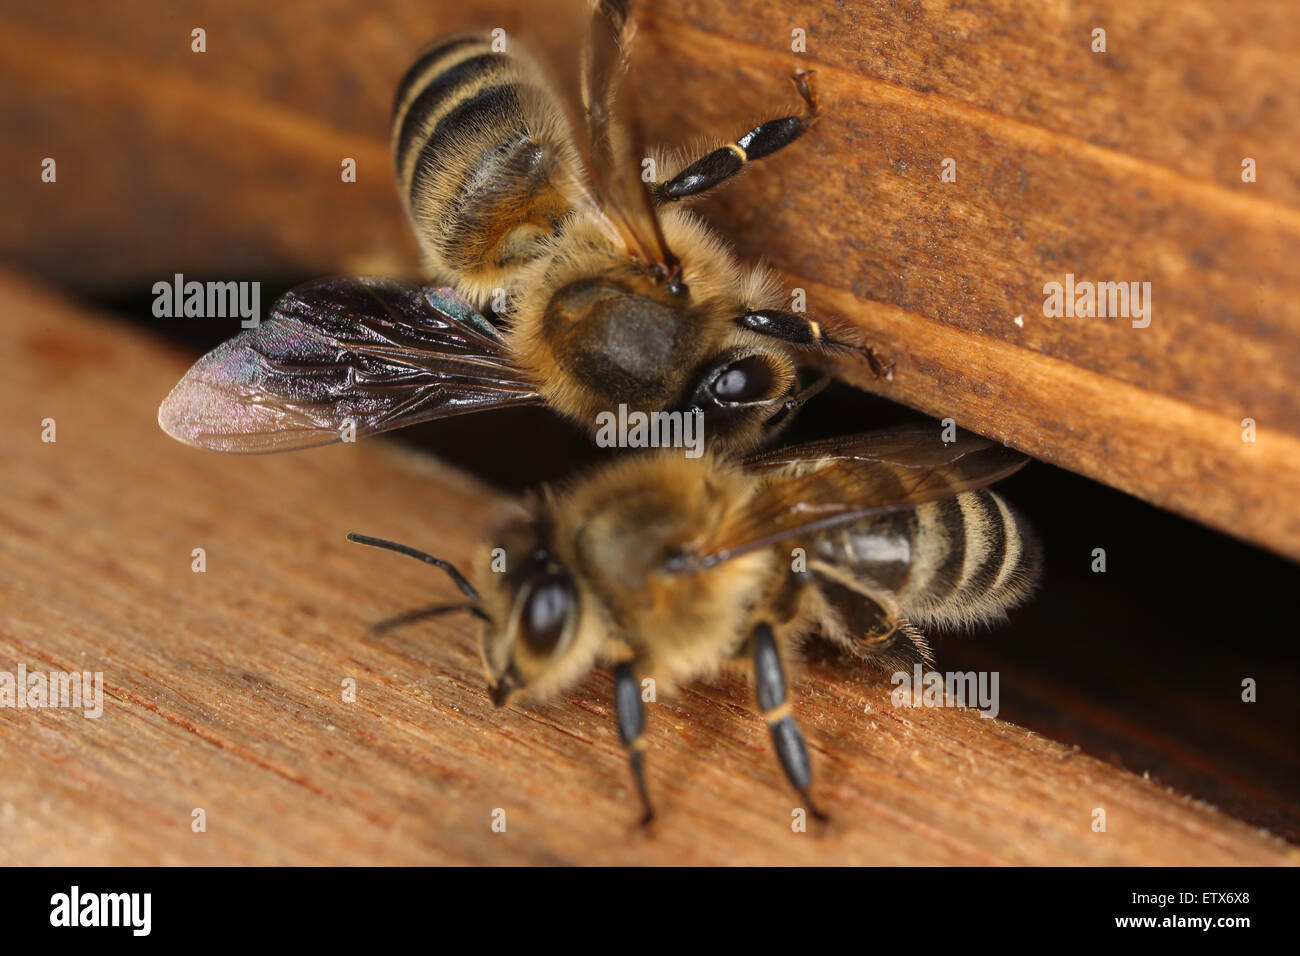 Berlin, Germany, at the entrance hole of a honeybee hive Stock Photo